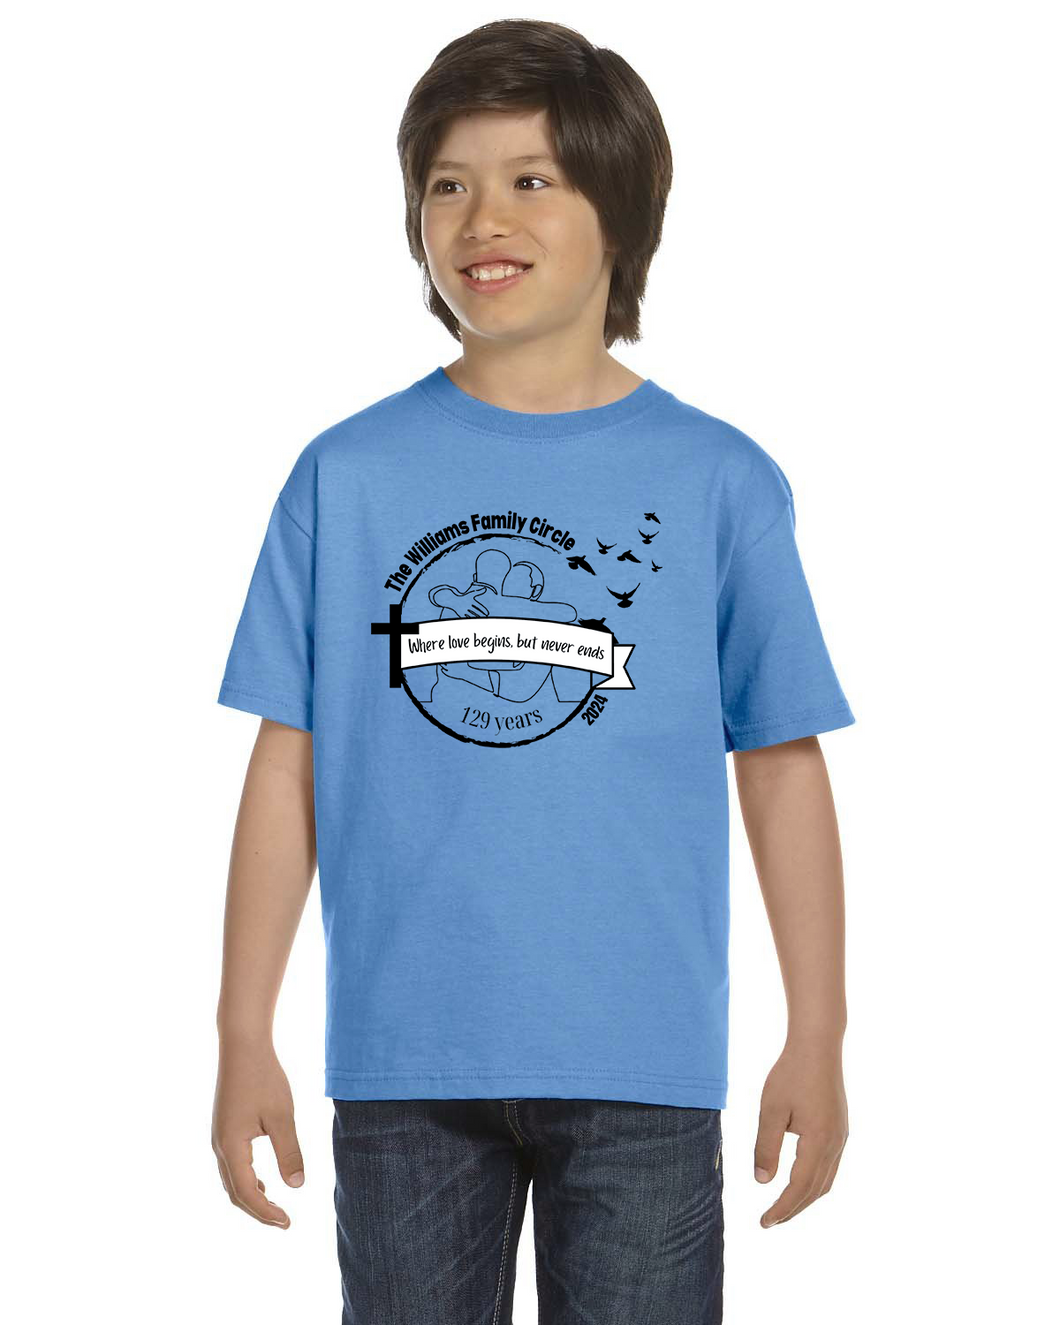 Williams Family Reunion Youth T-Shirt